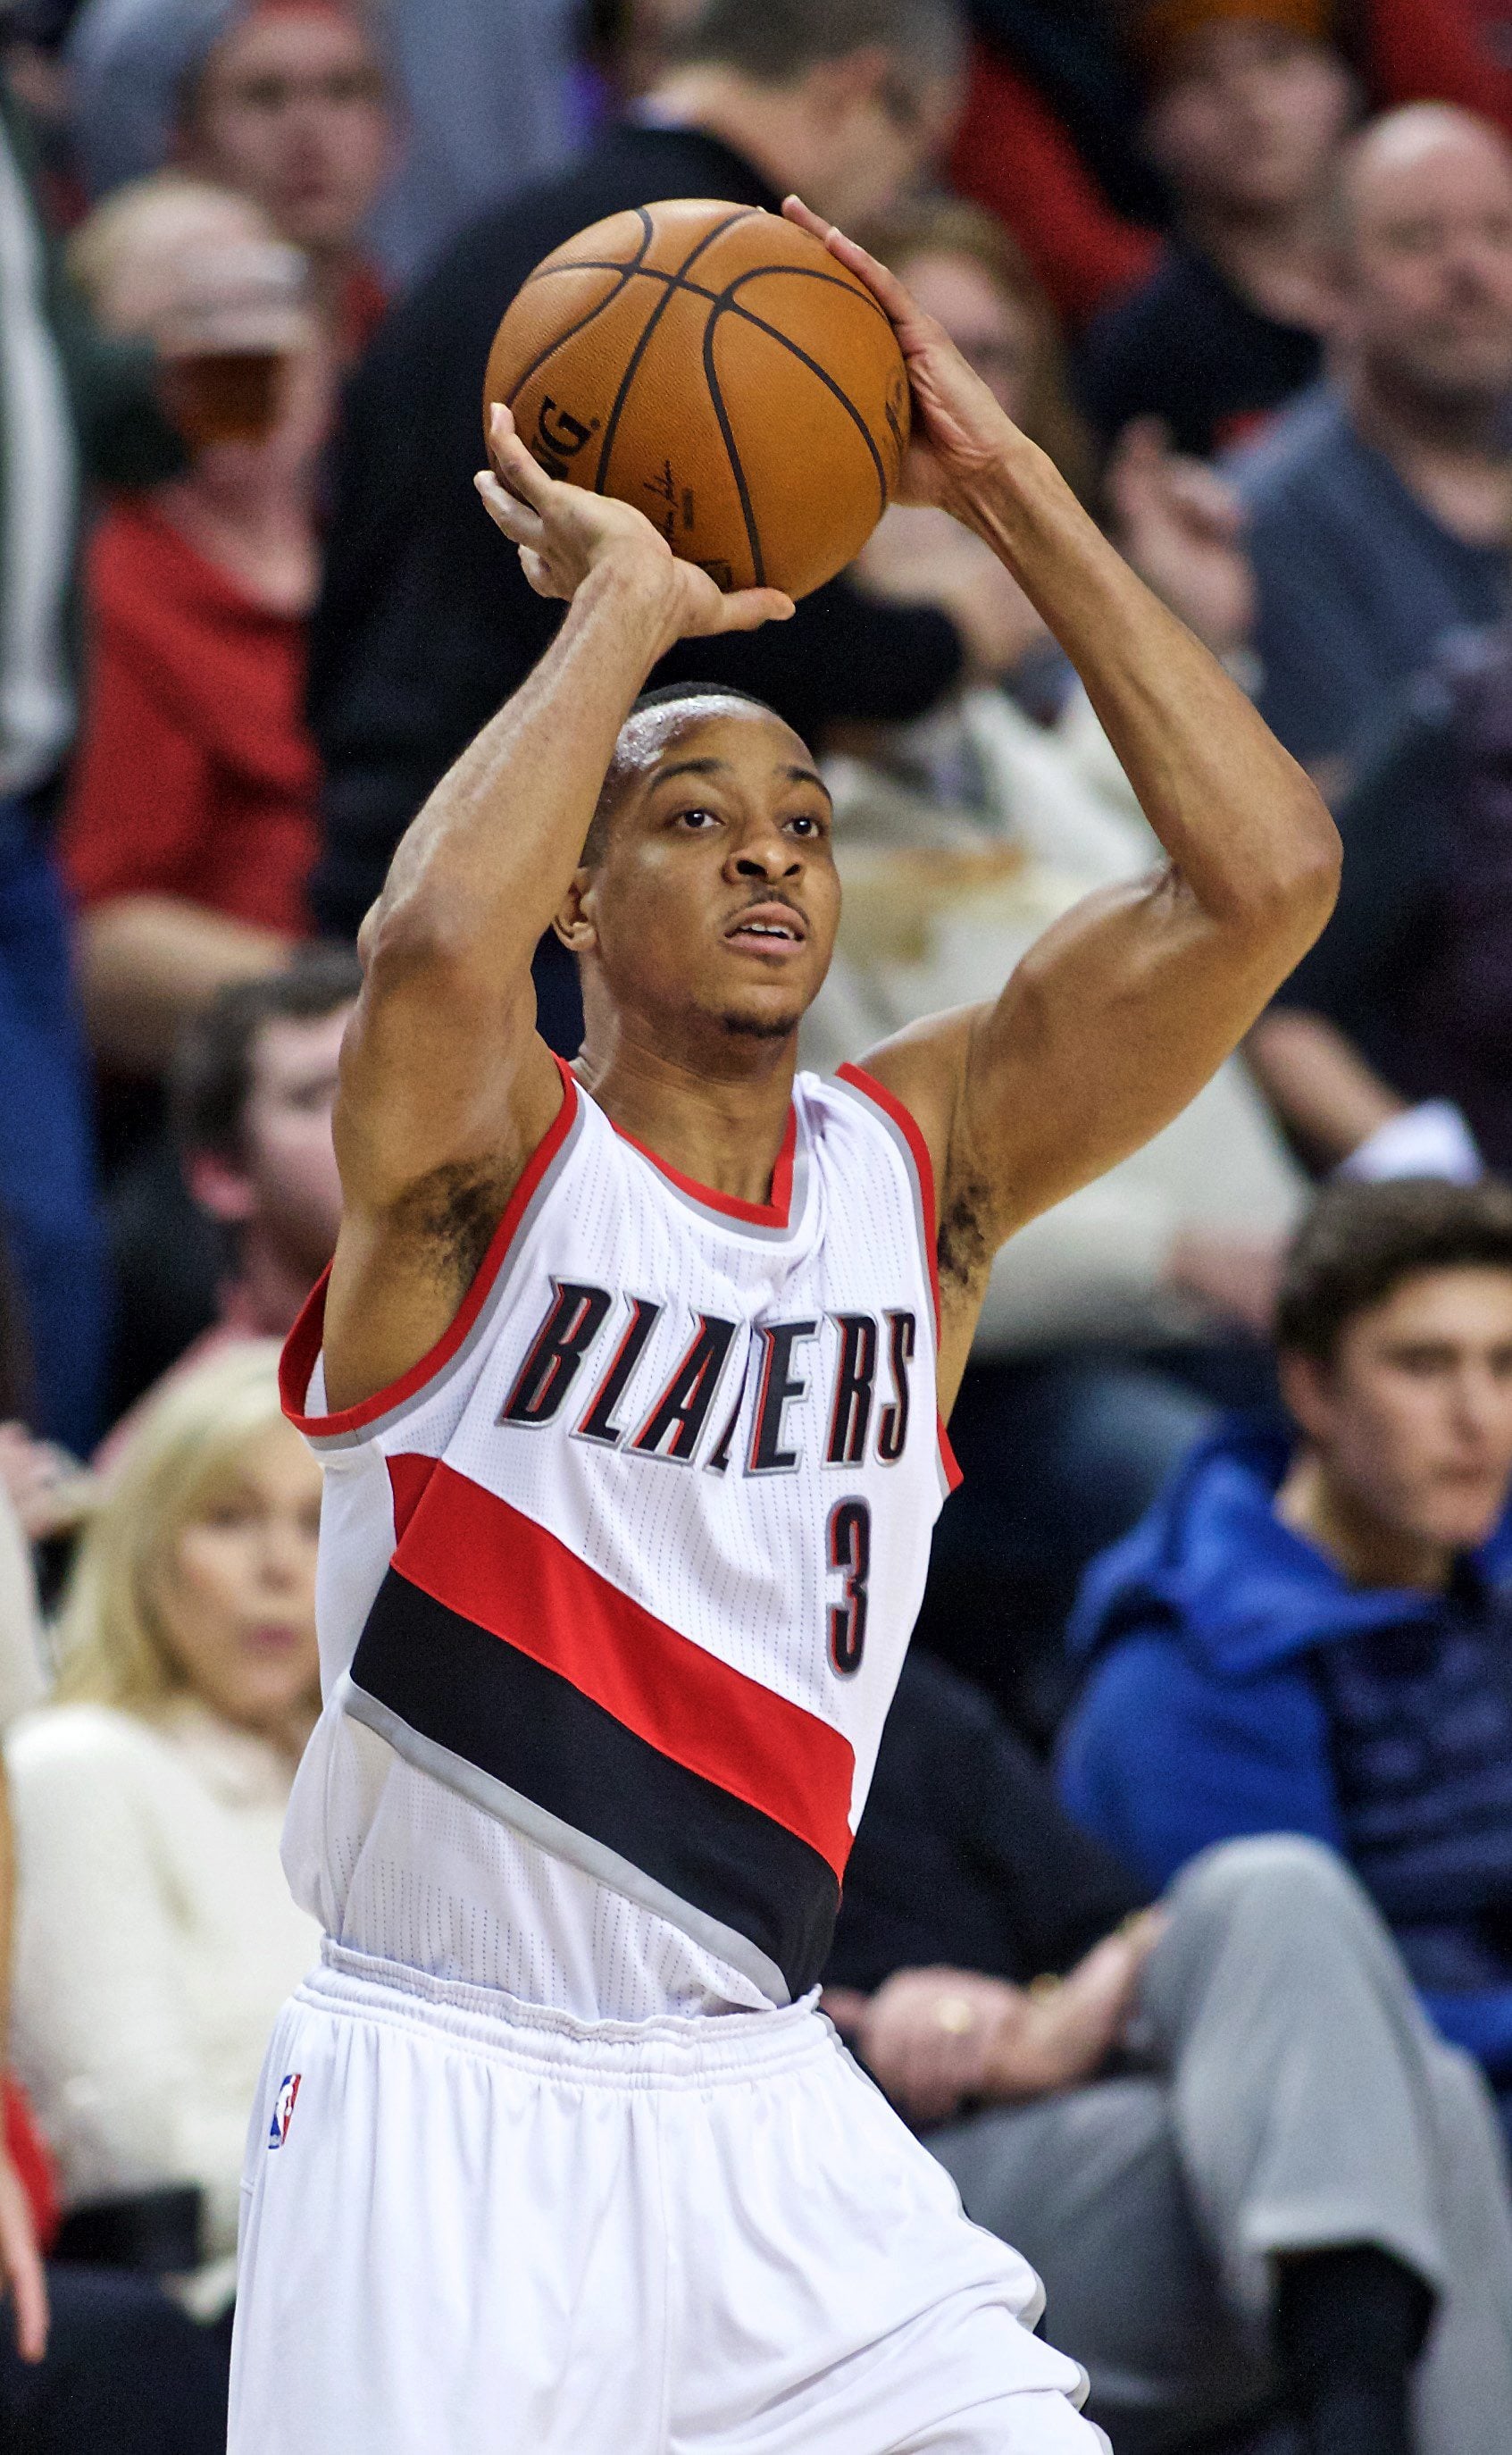 Portland Trail Blazers guard C.J. McCollum shoots against the Minnesota Timberwolves during the second half of an NBA basketball game in Portland, Ore., Sunday, Jan. 31, 2016. The Trail Blazers won 96-93.